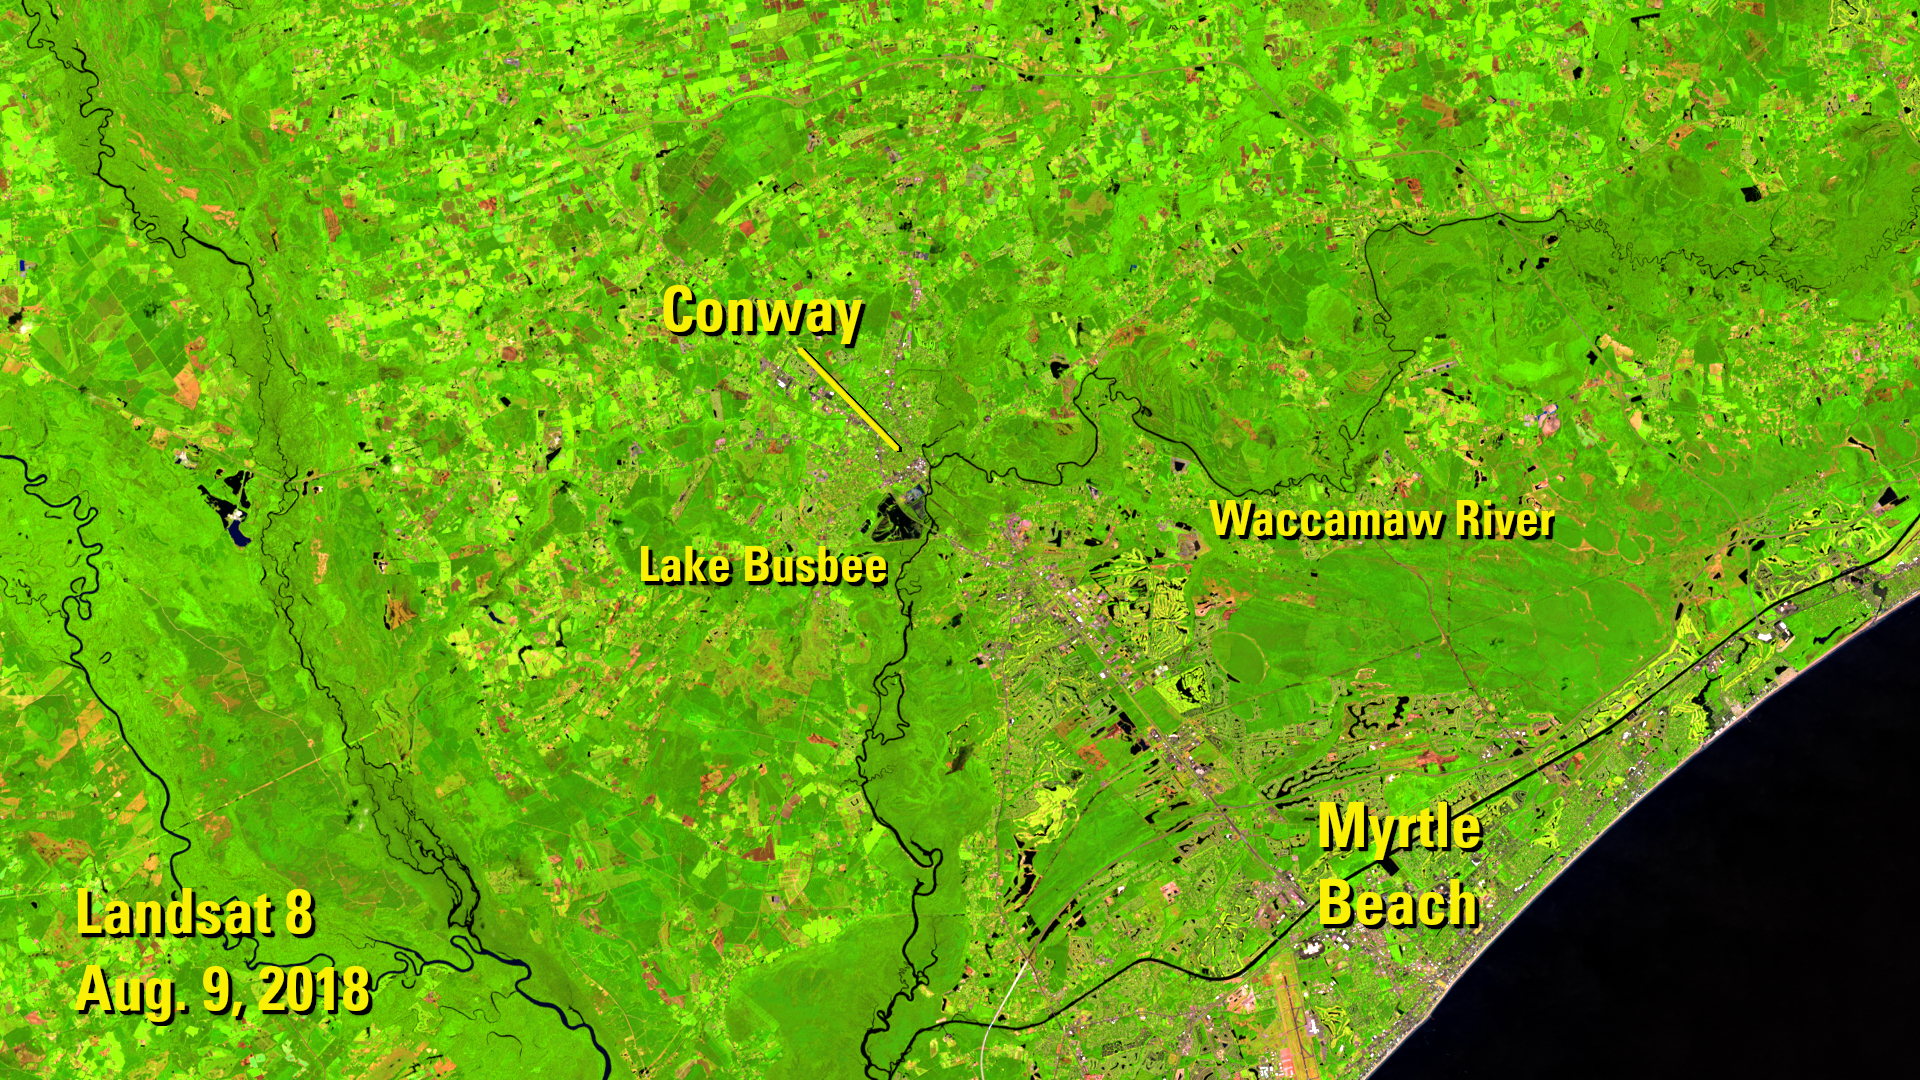 Landsat 8 image of Conway, S.C. before Hurricane Florence